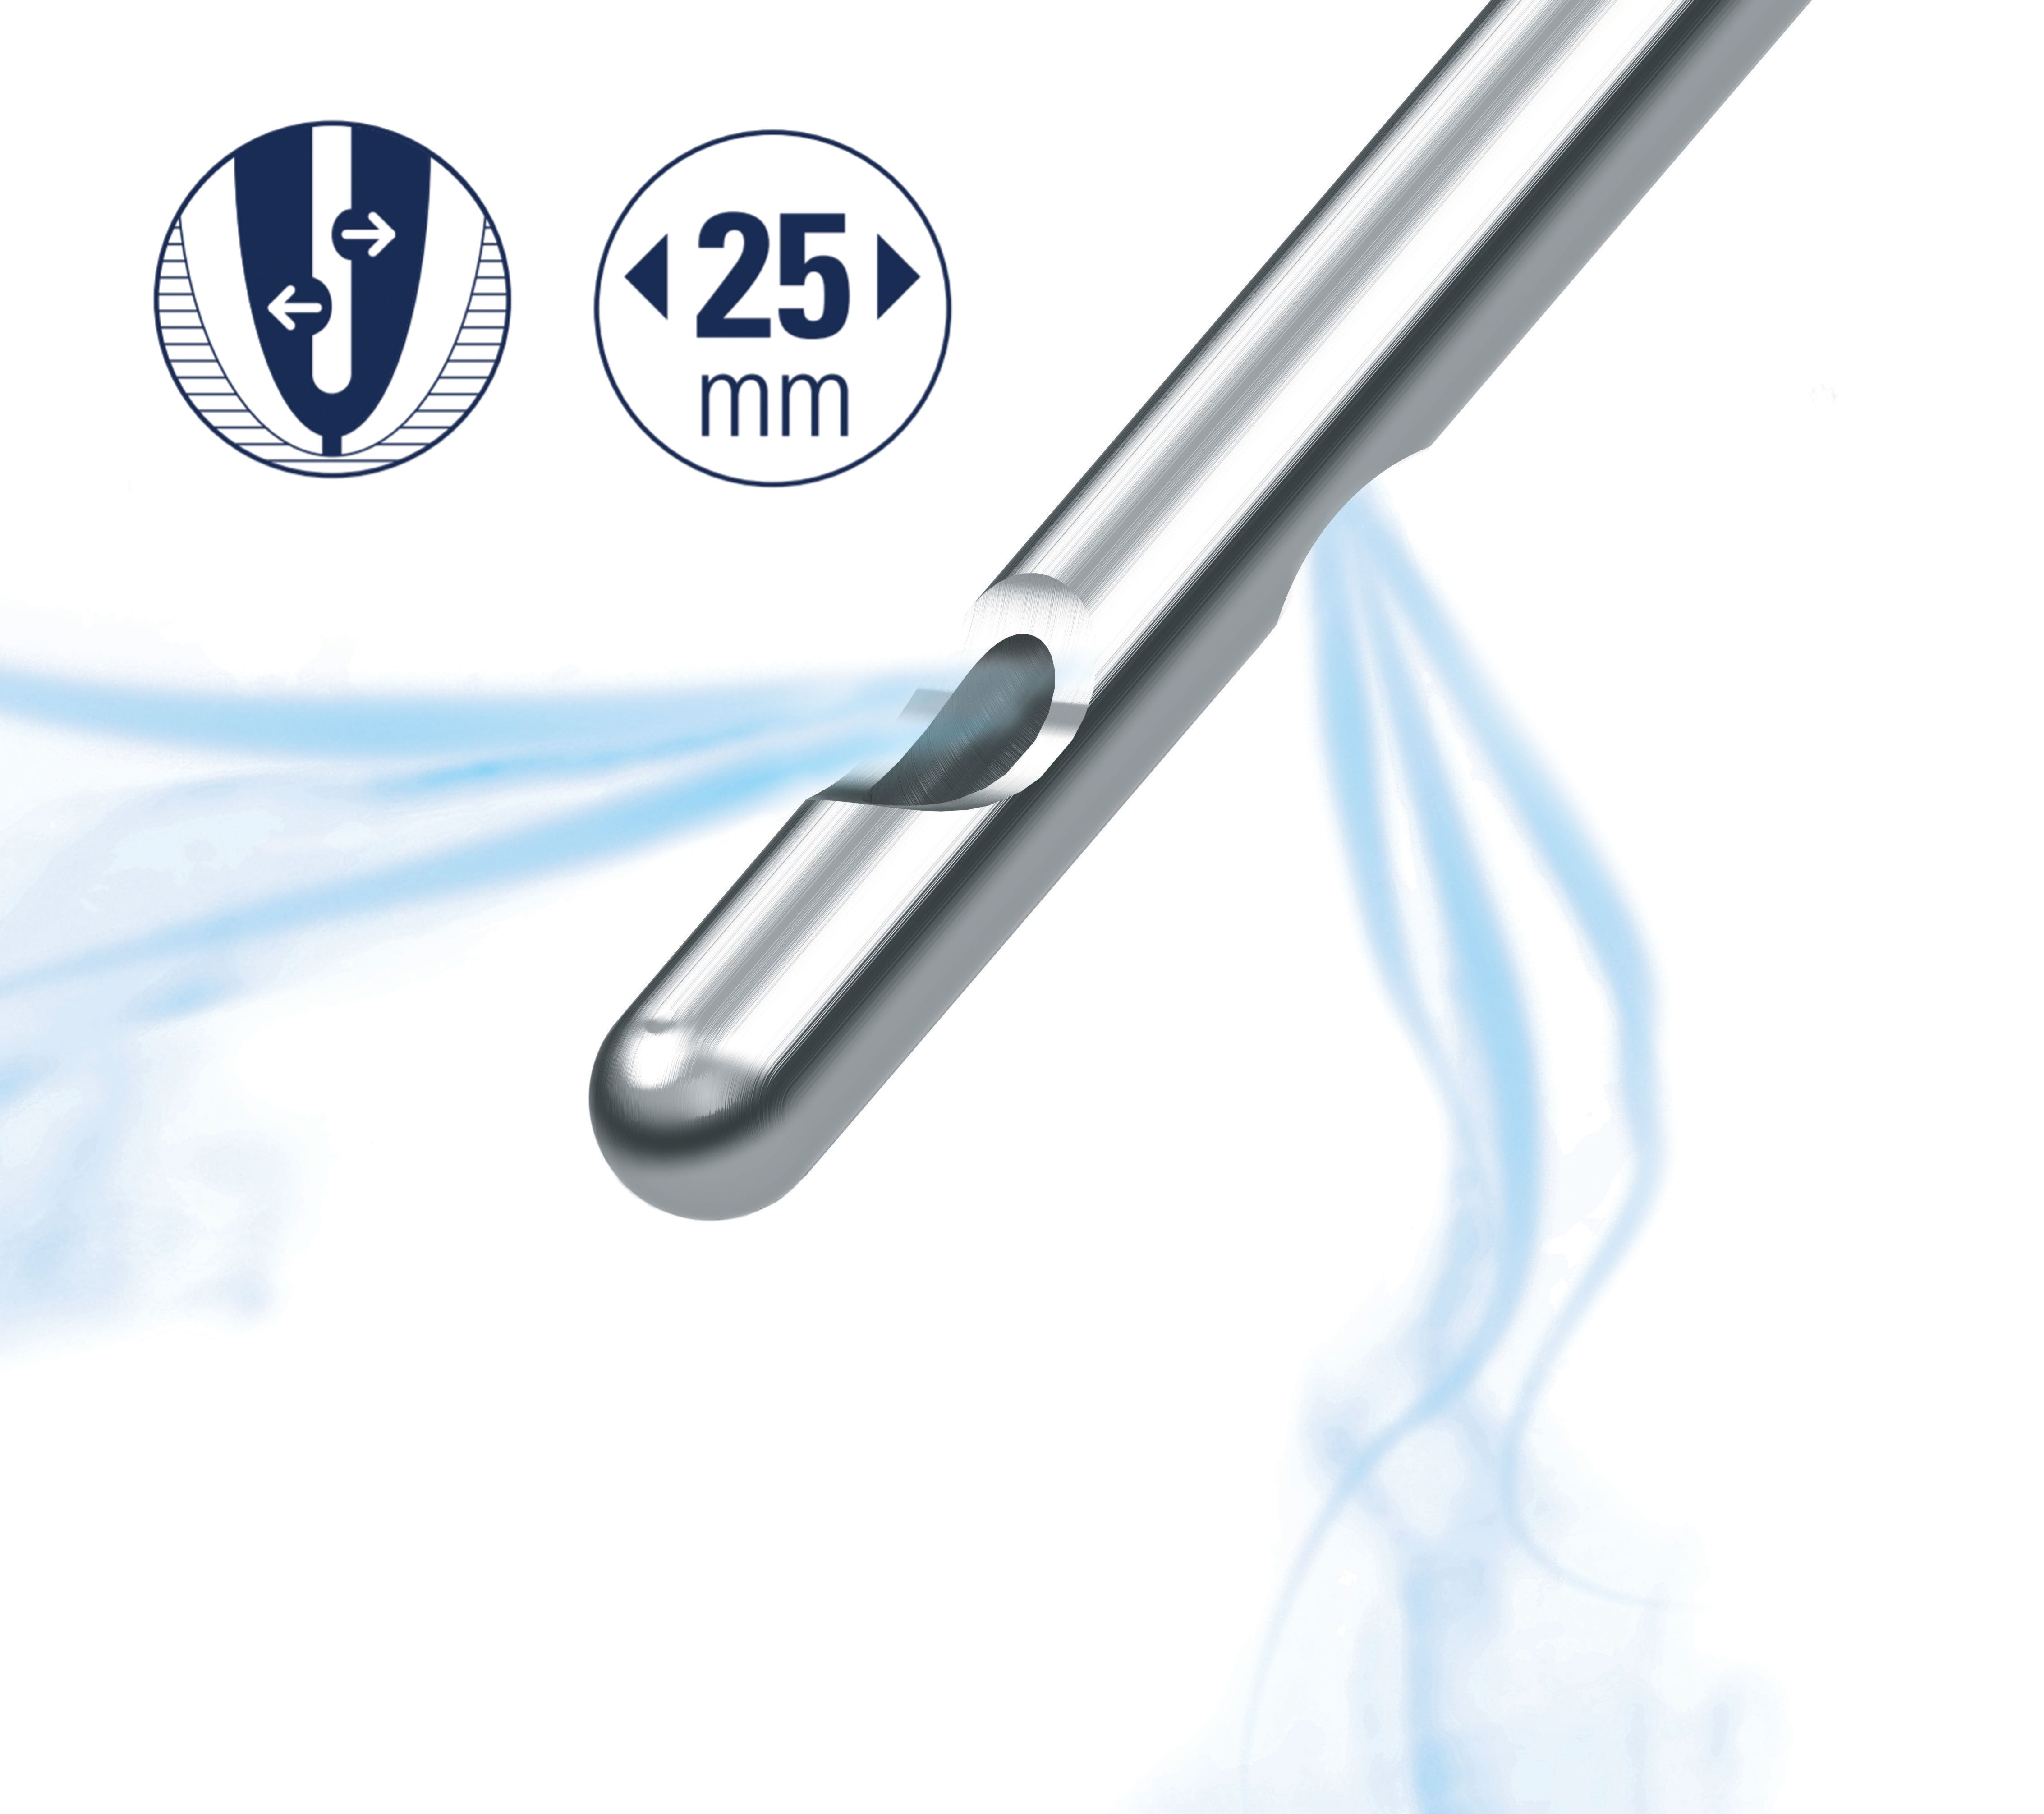 transcodent Flexible Steel
Irrigation Needles. Closed-rounded tip with double lateral vents minimizes the risk of needle binding and wedging in the root
canals, trauma to soft/hard tissue and extrusion of the irrigation solution beyond apical foramen